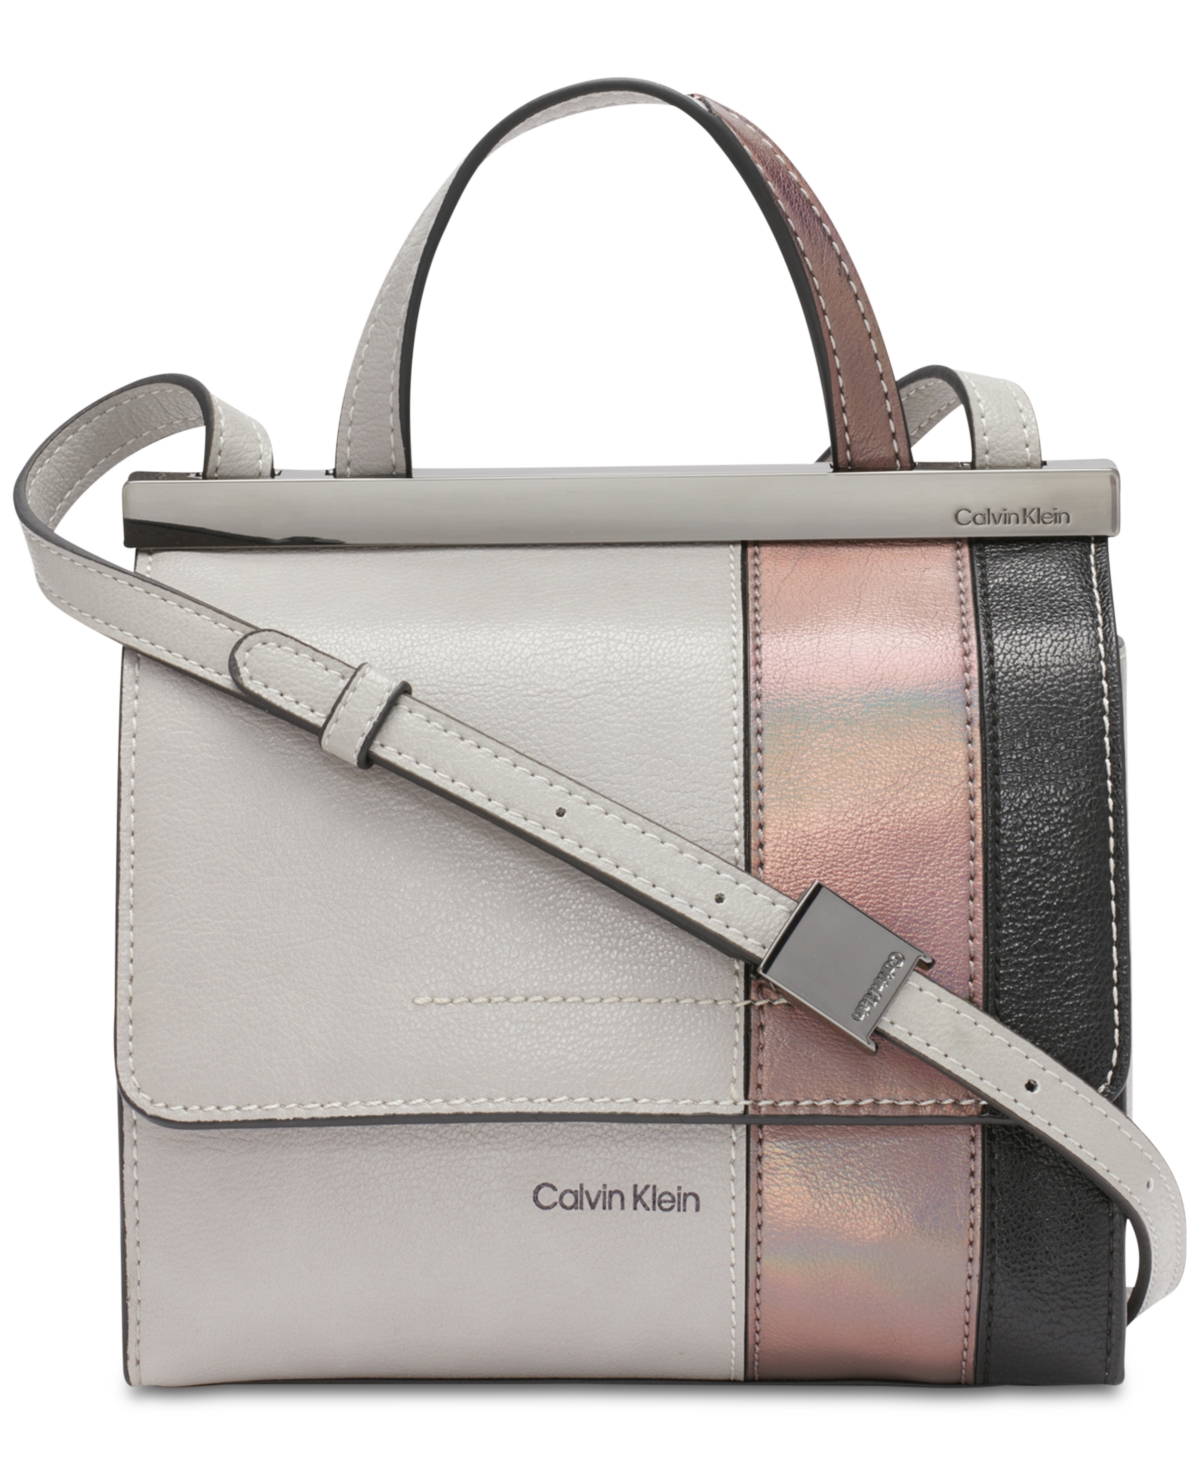 Calvin Klein Coral Flap Crossbody With Adjustable Strap In Stone,iridescent,black